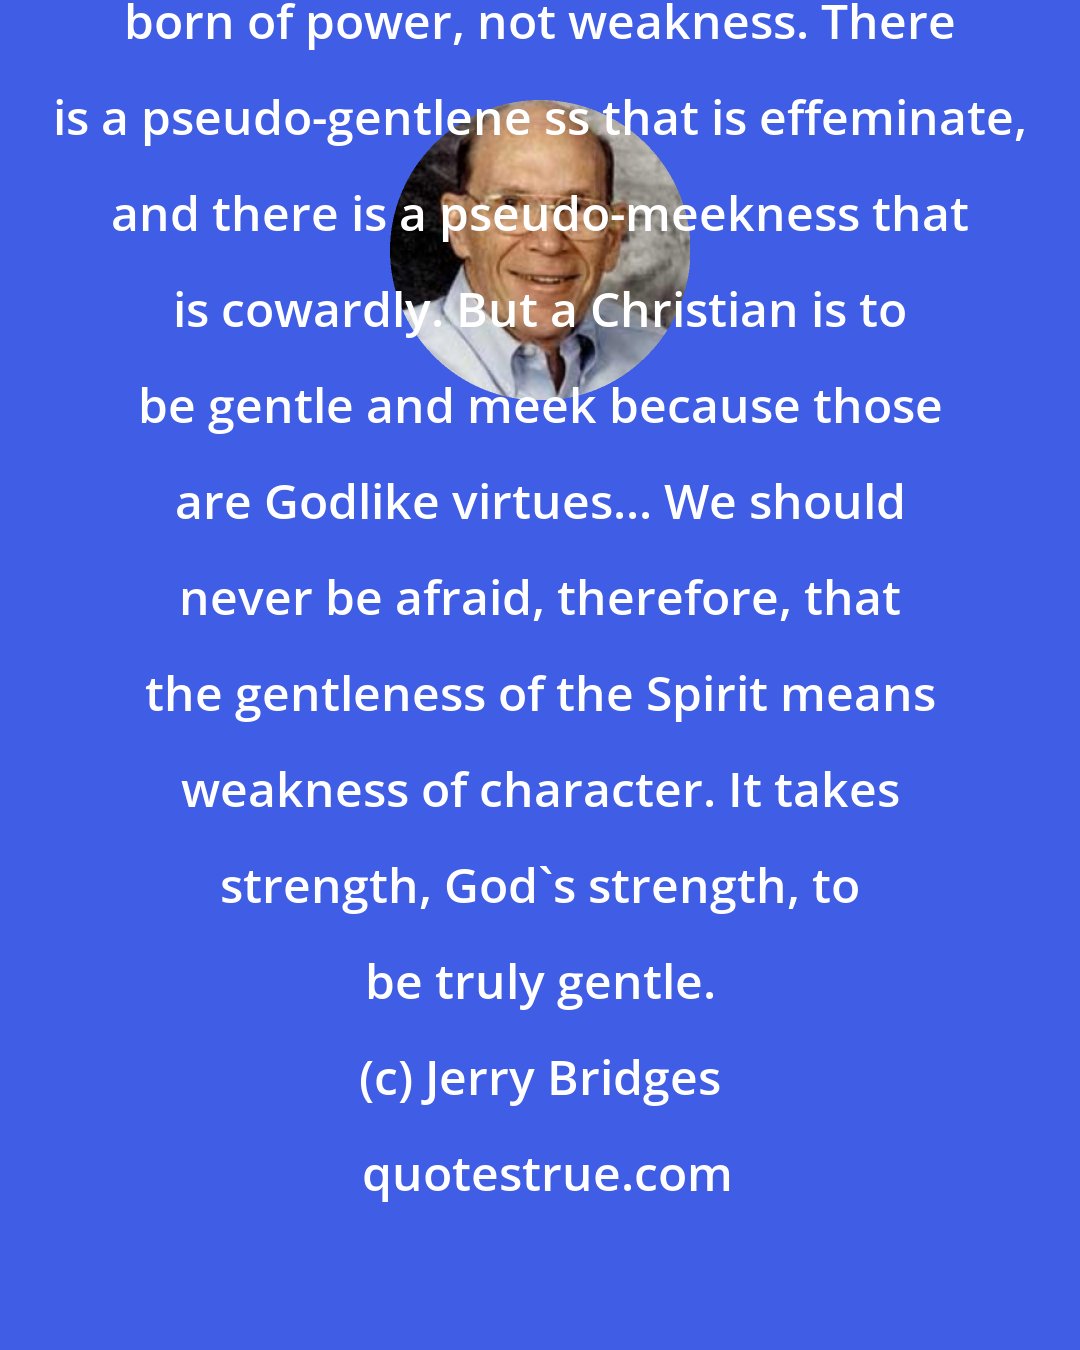 Jerry Bridges: Both gentleness and meekness are born of power, not weakness. There is a pseudo-gentlene ss that is effeminate, and there is a pseudo-meekness that is cowardly. But a Christian is to be gentle and meek because those are Godlike virtues... We should never be afraid, therefore, that the gentleness of the Spirit means weakness of character. It takes strength, God's strength, to be truly gentle.